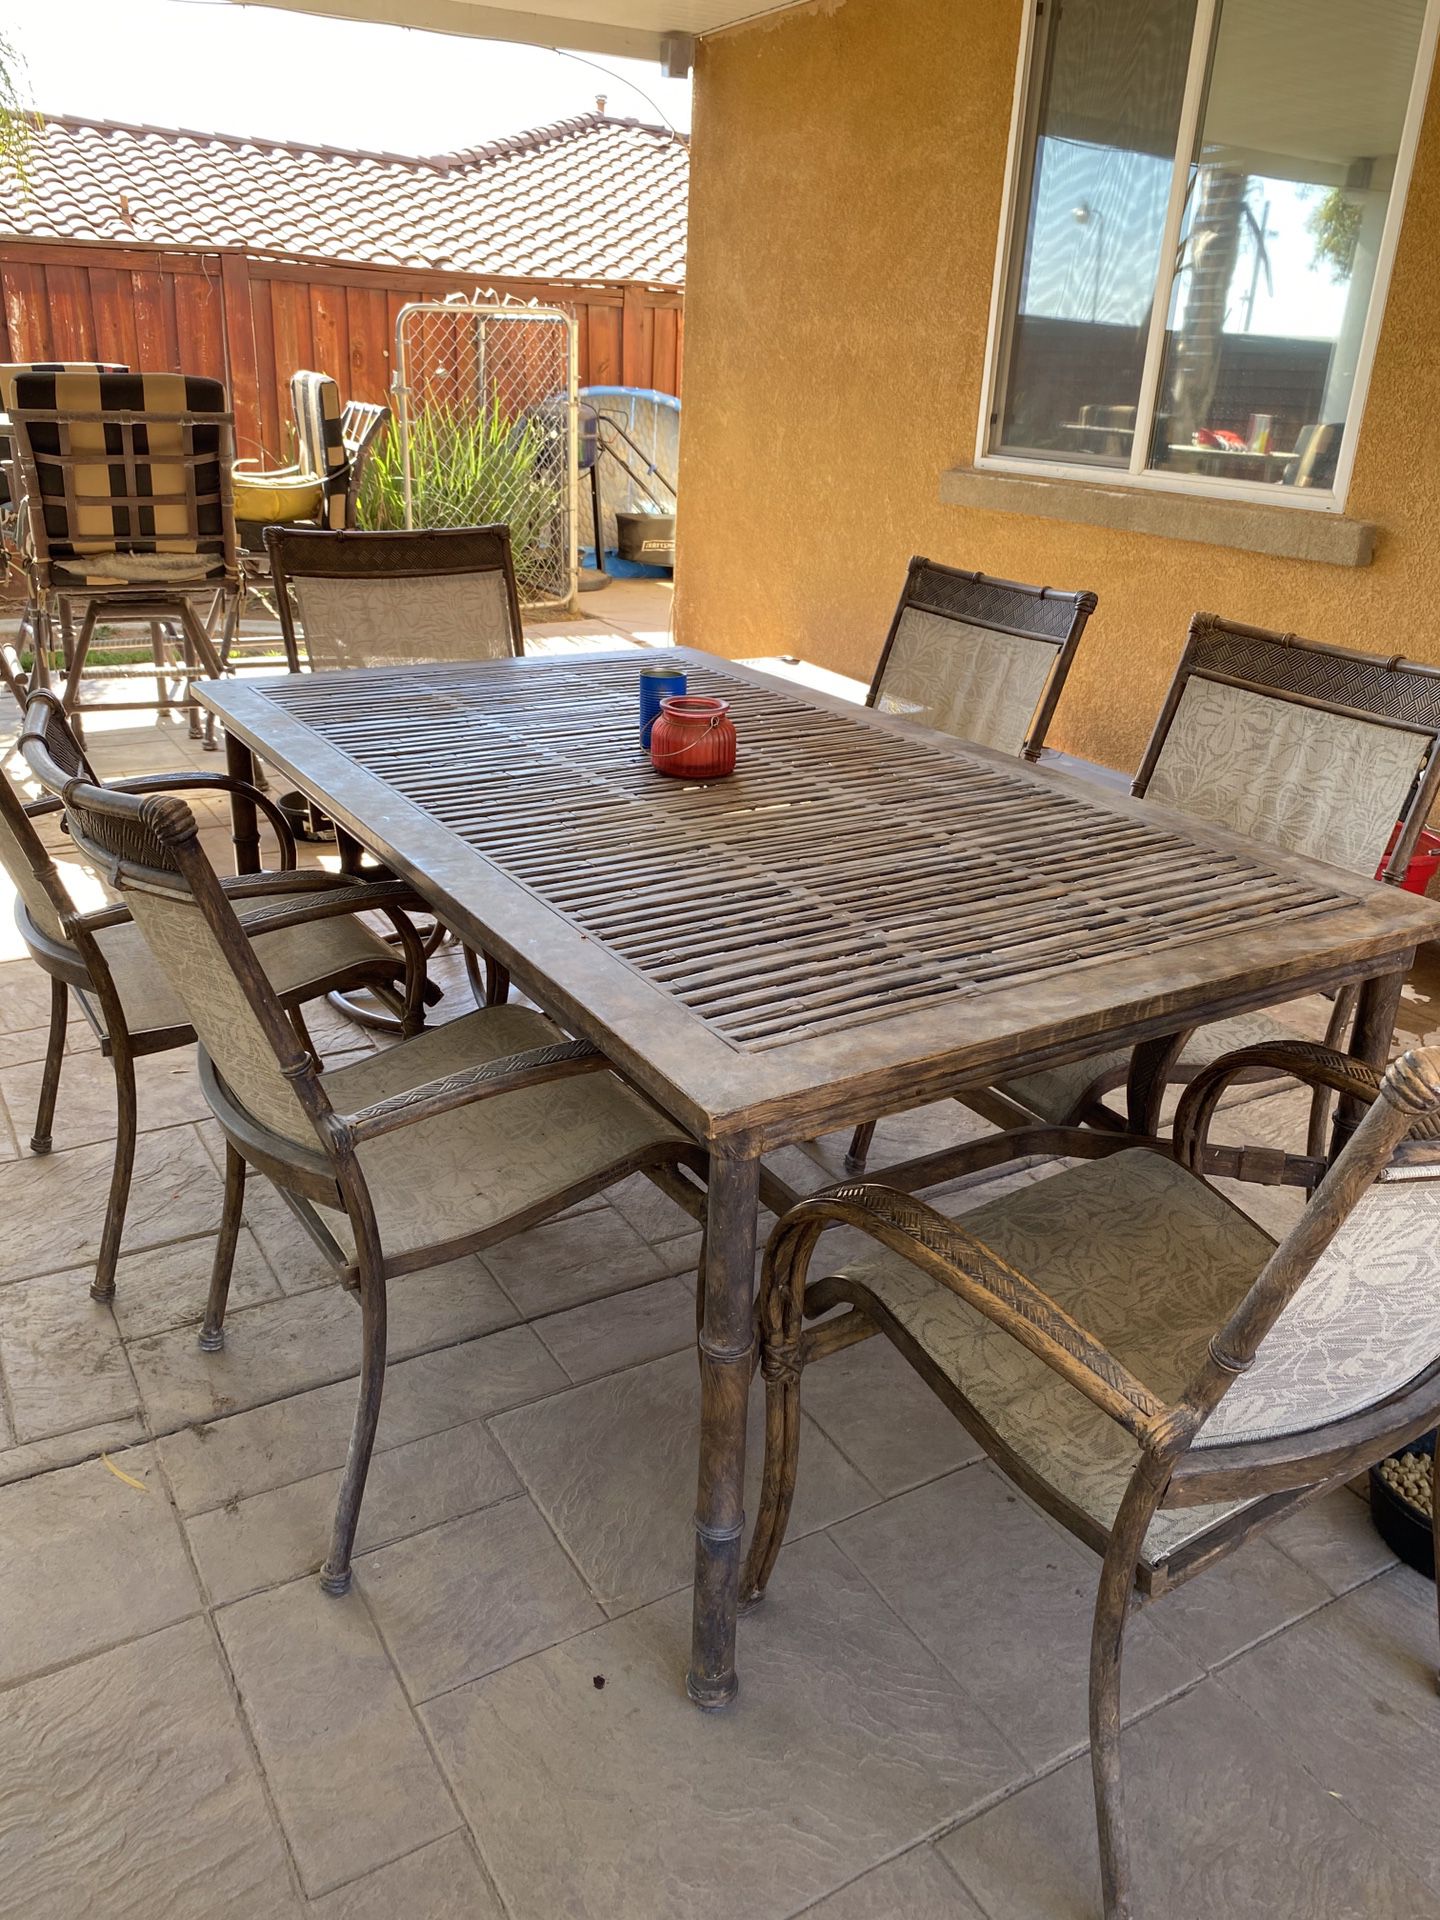 Patio Table, 6 Chairs & 1 footrest, 1 end table